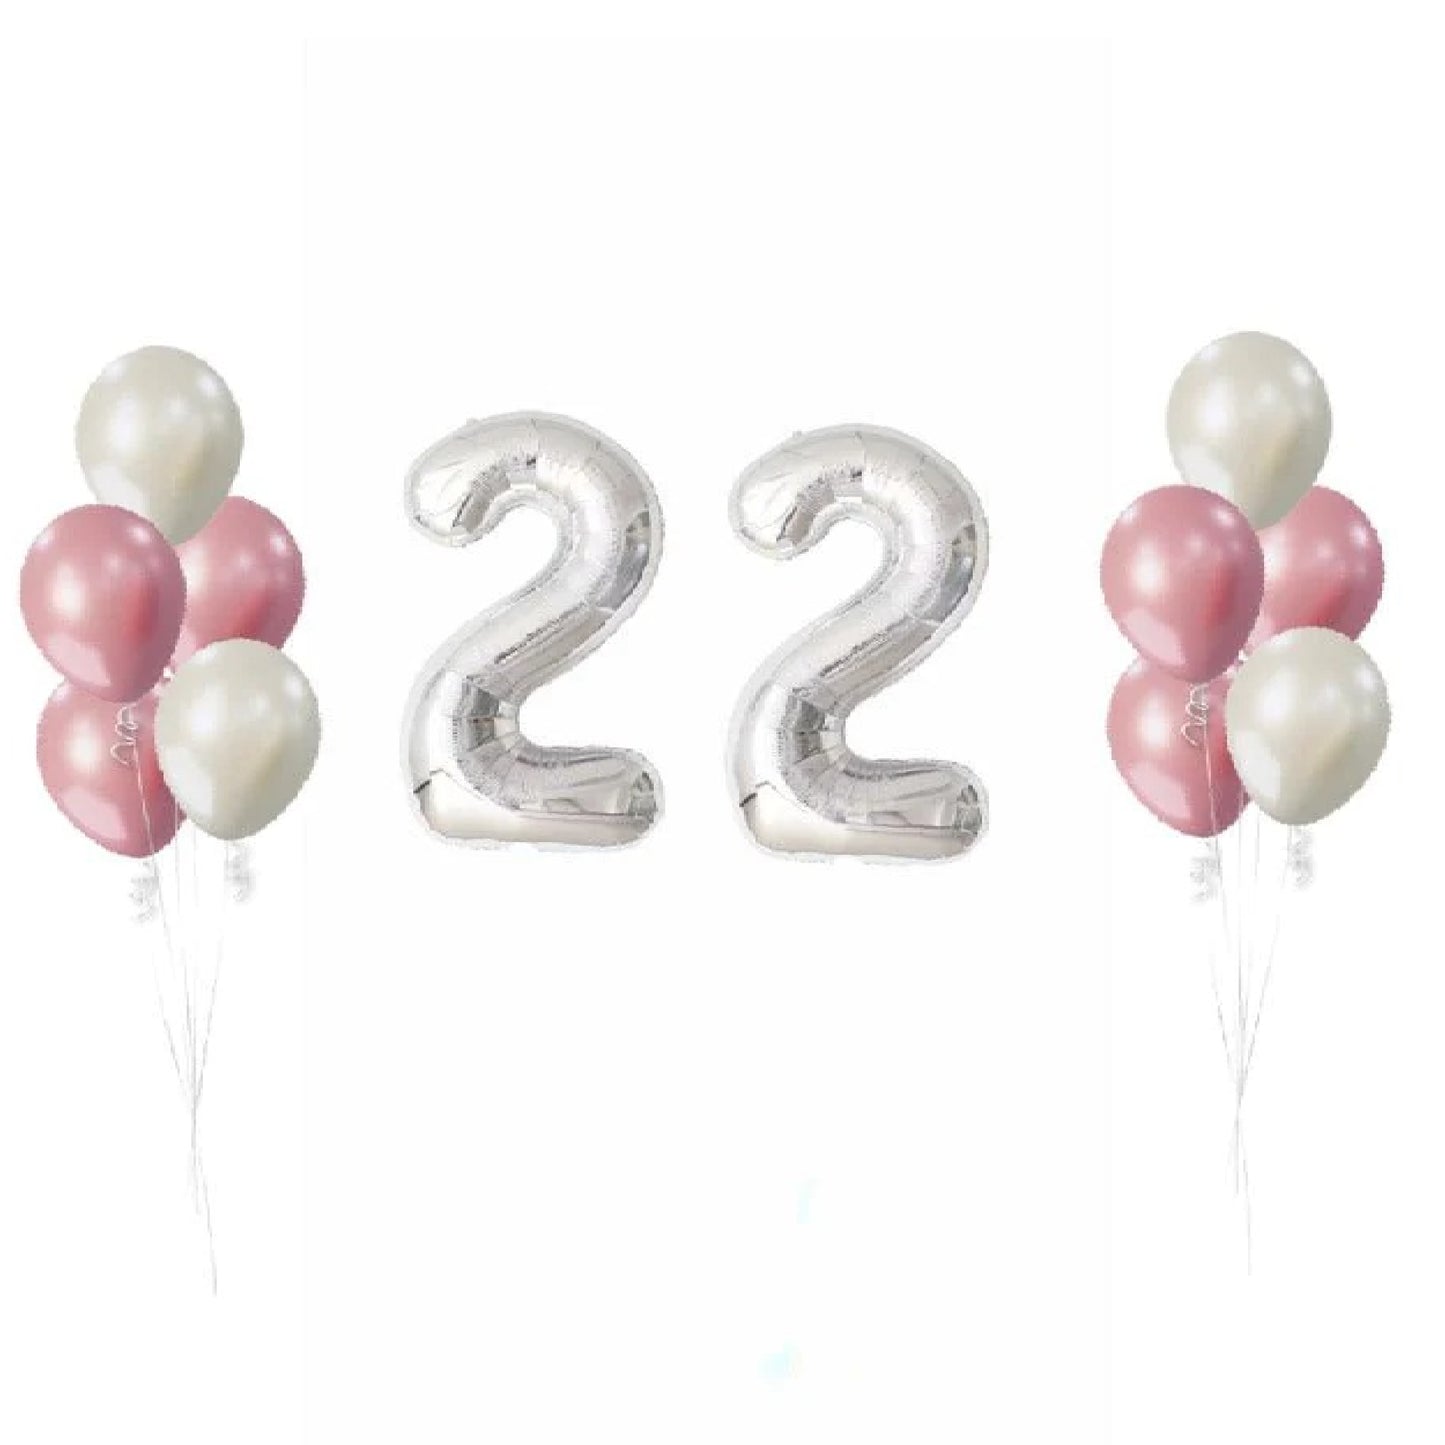 PINK CHIC - NUMBERS & 11IN BALLOON BOUQUETS SET